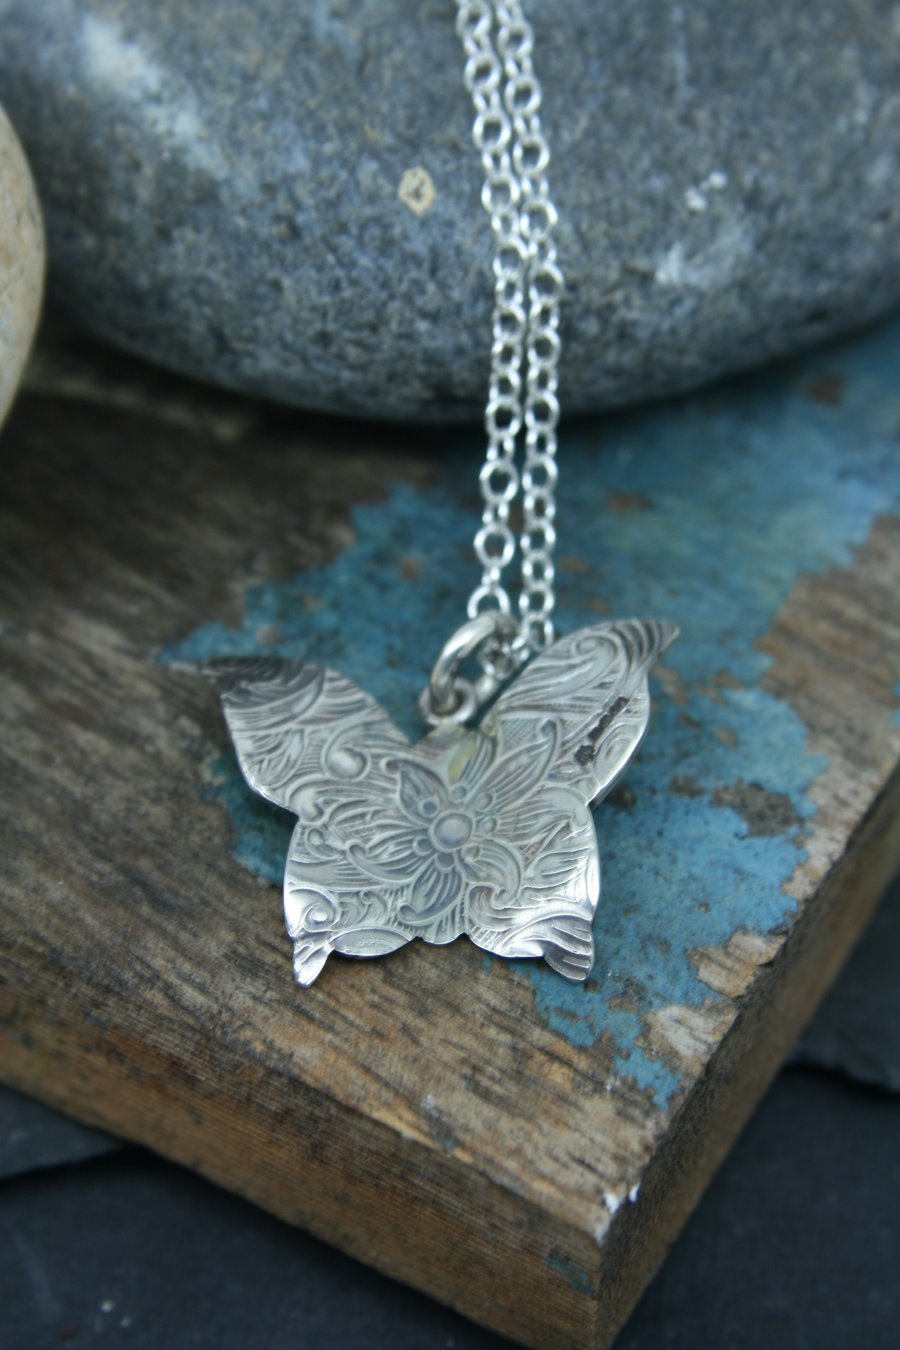 Paisley imprinted butterflysterling silver pendant